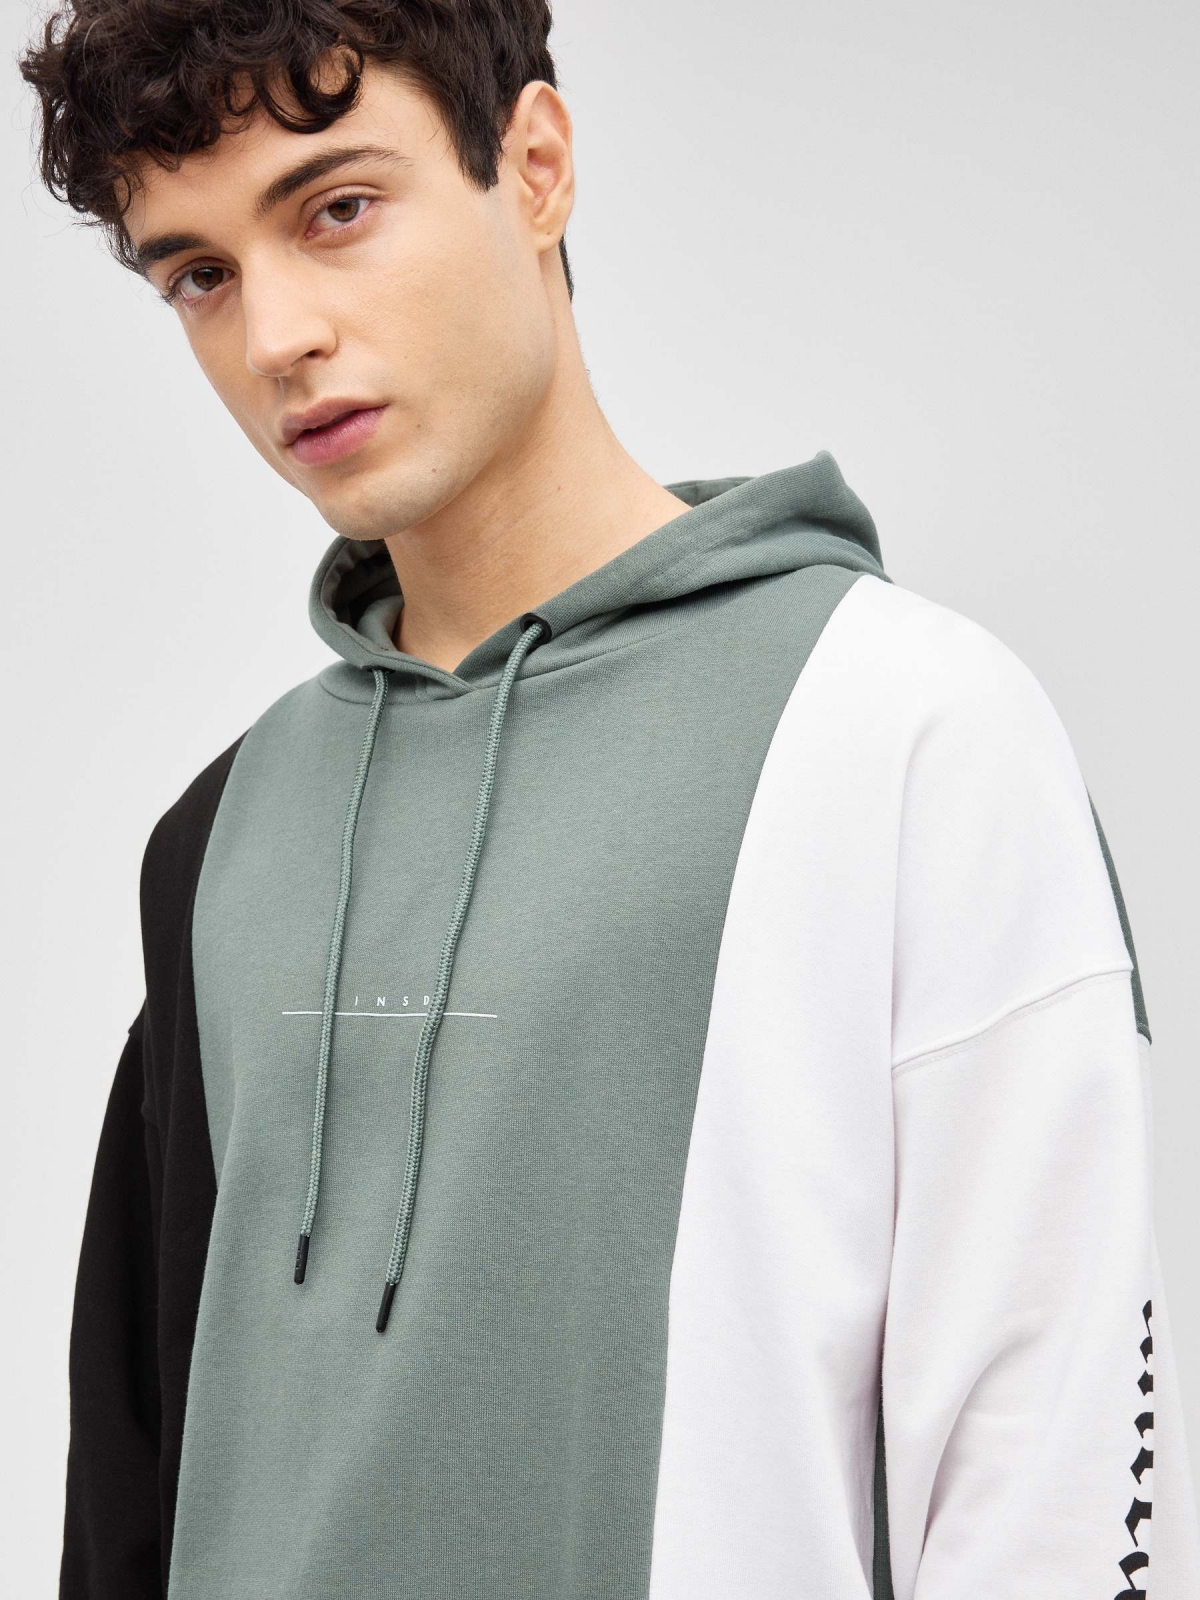 Tricolor sweatshirt with text greyish green detail view